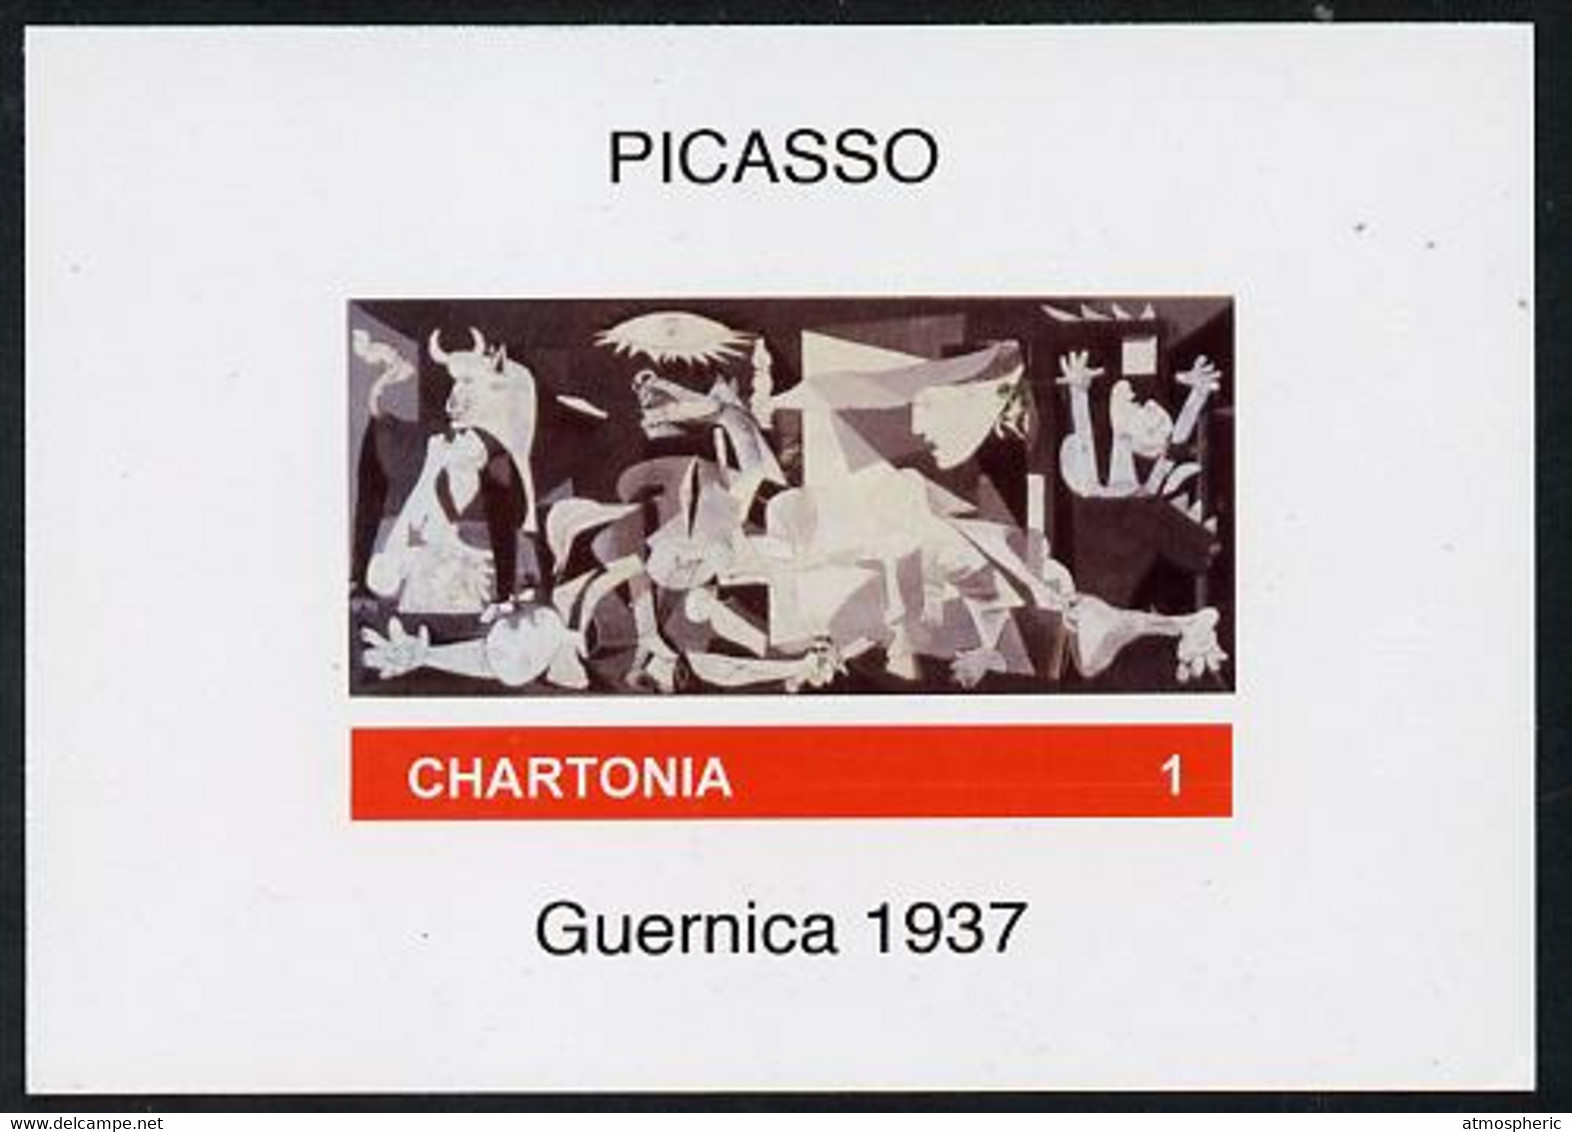 Chartonia (Fantasy) Guernica (1937) By Picasso Imperf Deluxe Sheet On Glossy Card Unmounted Mint - Fantasy Labels